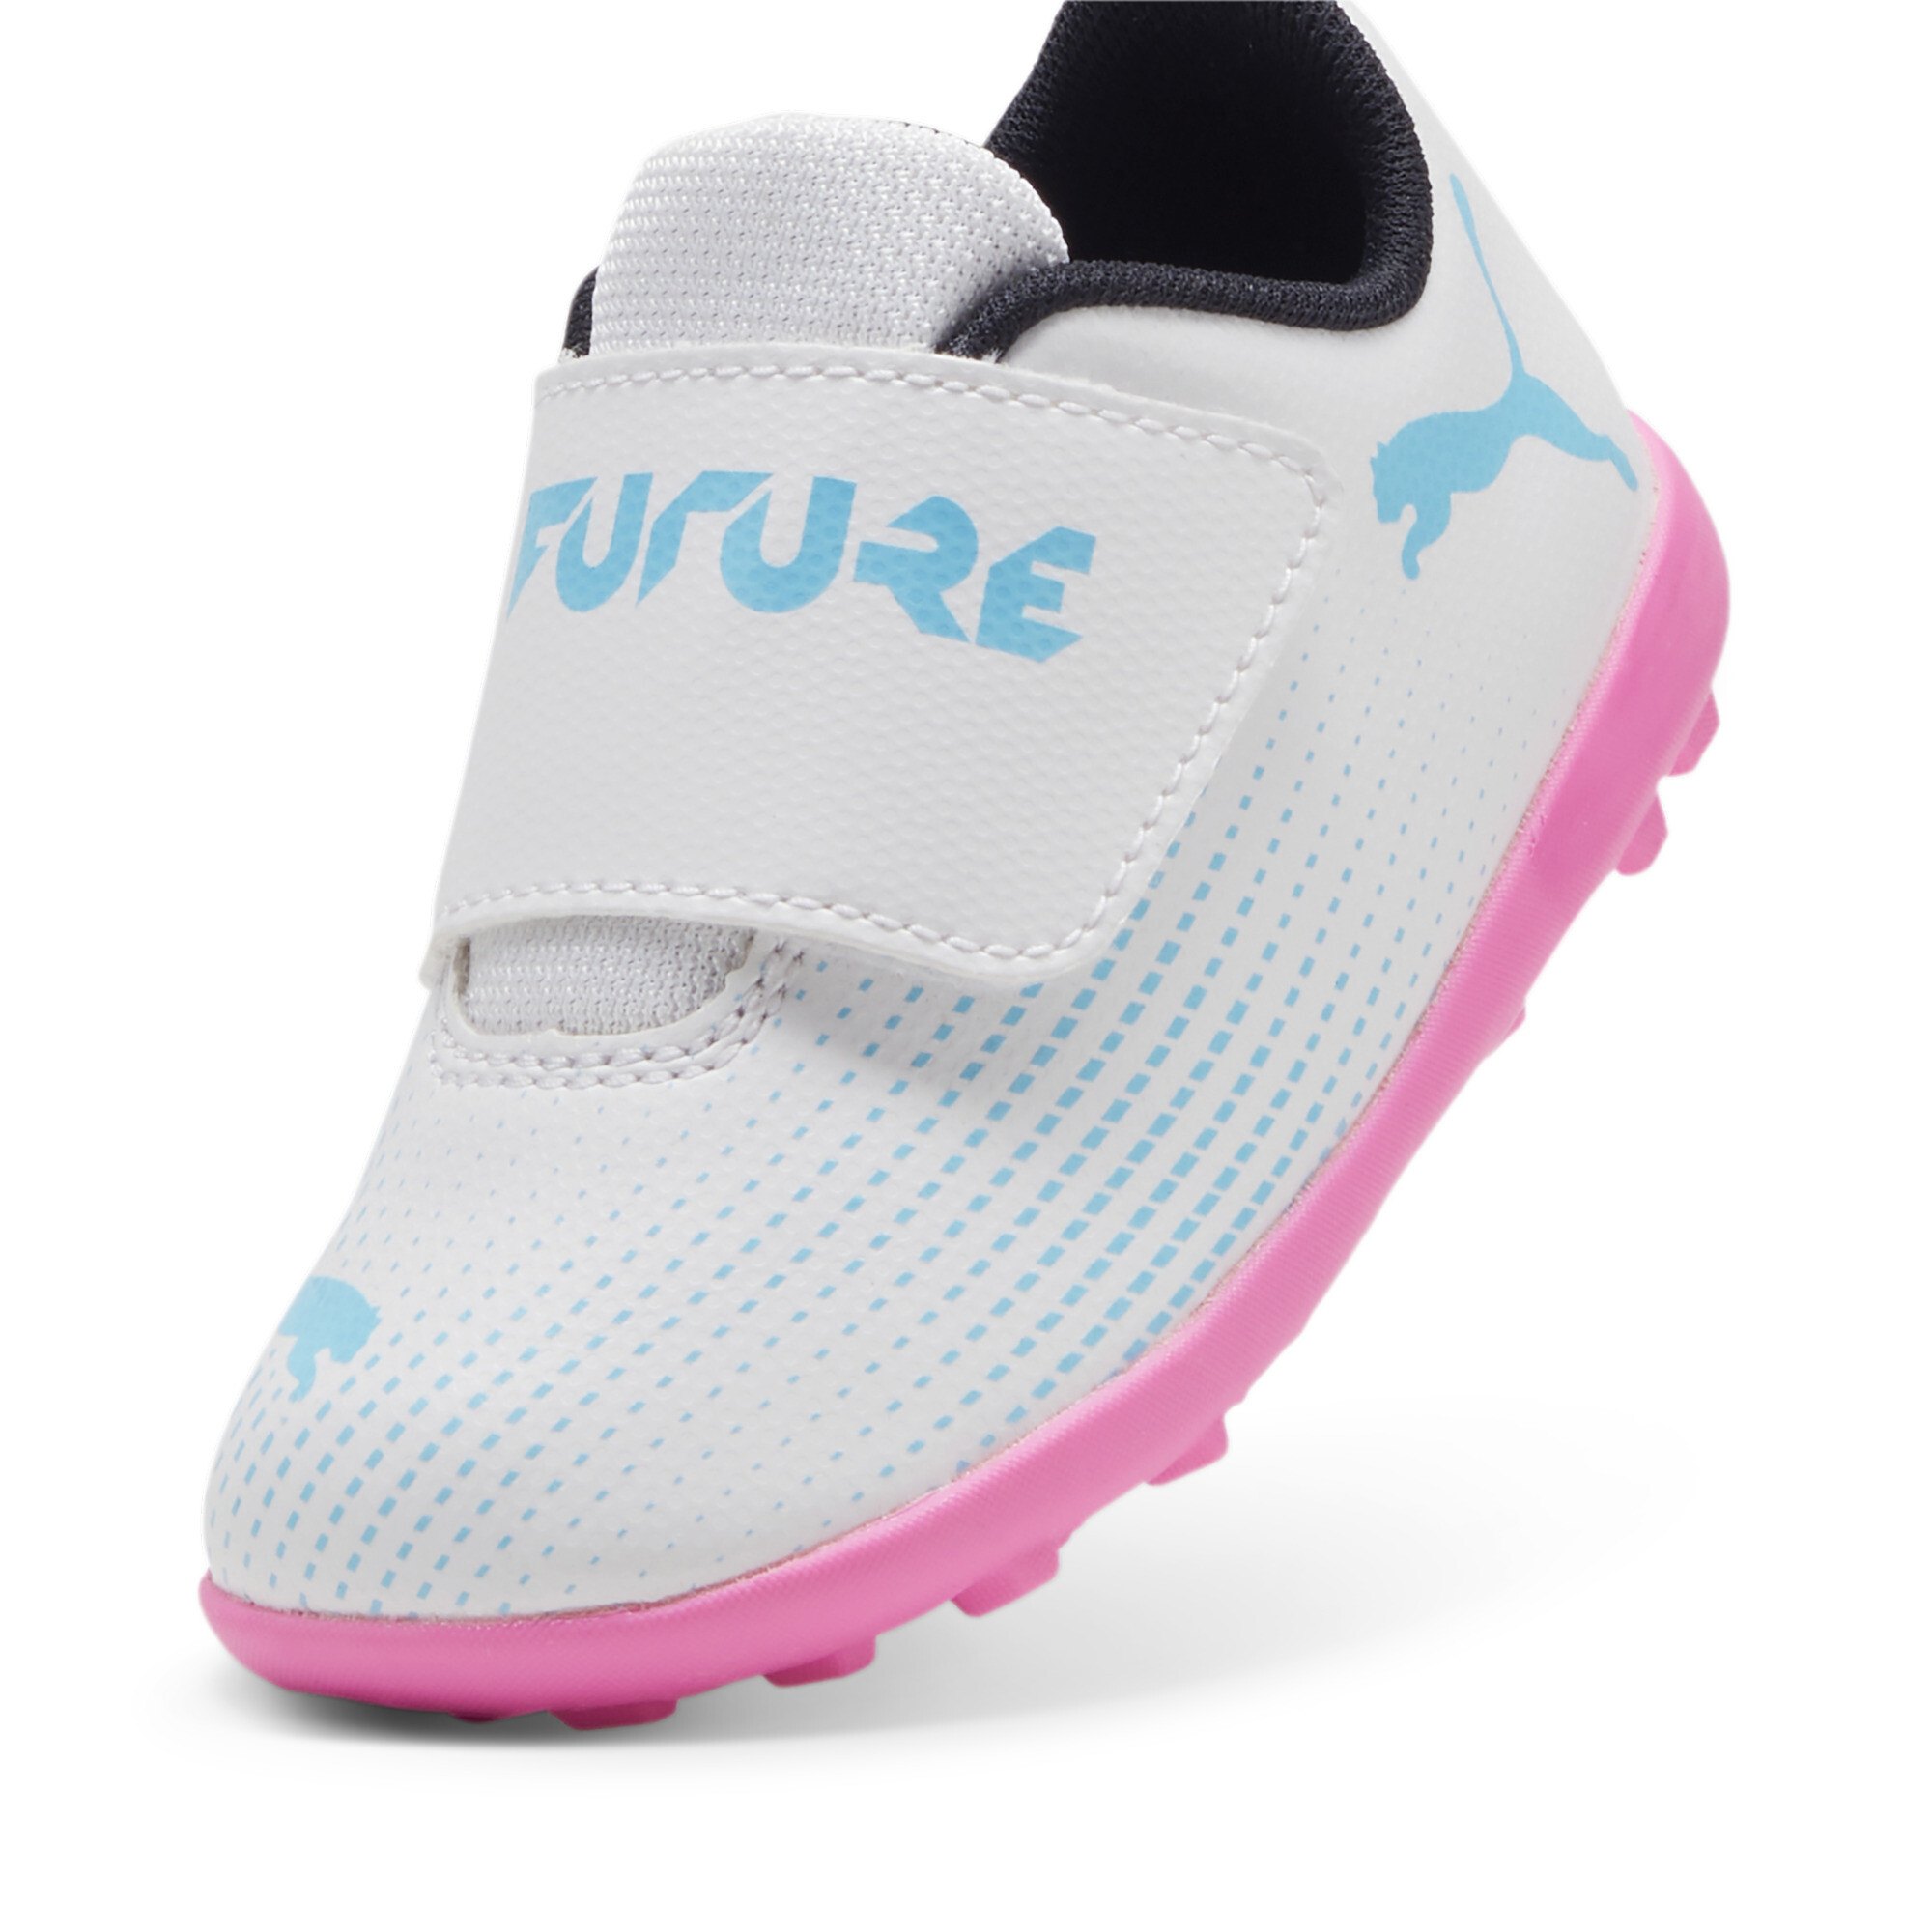 Kids' PUMA FUTURE 7 PLAY TT Toddlers' Football Boots In White/Pink, Size EU 22